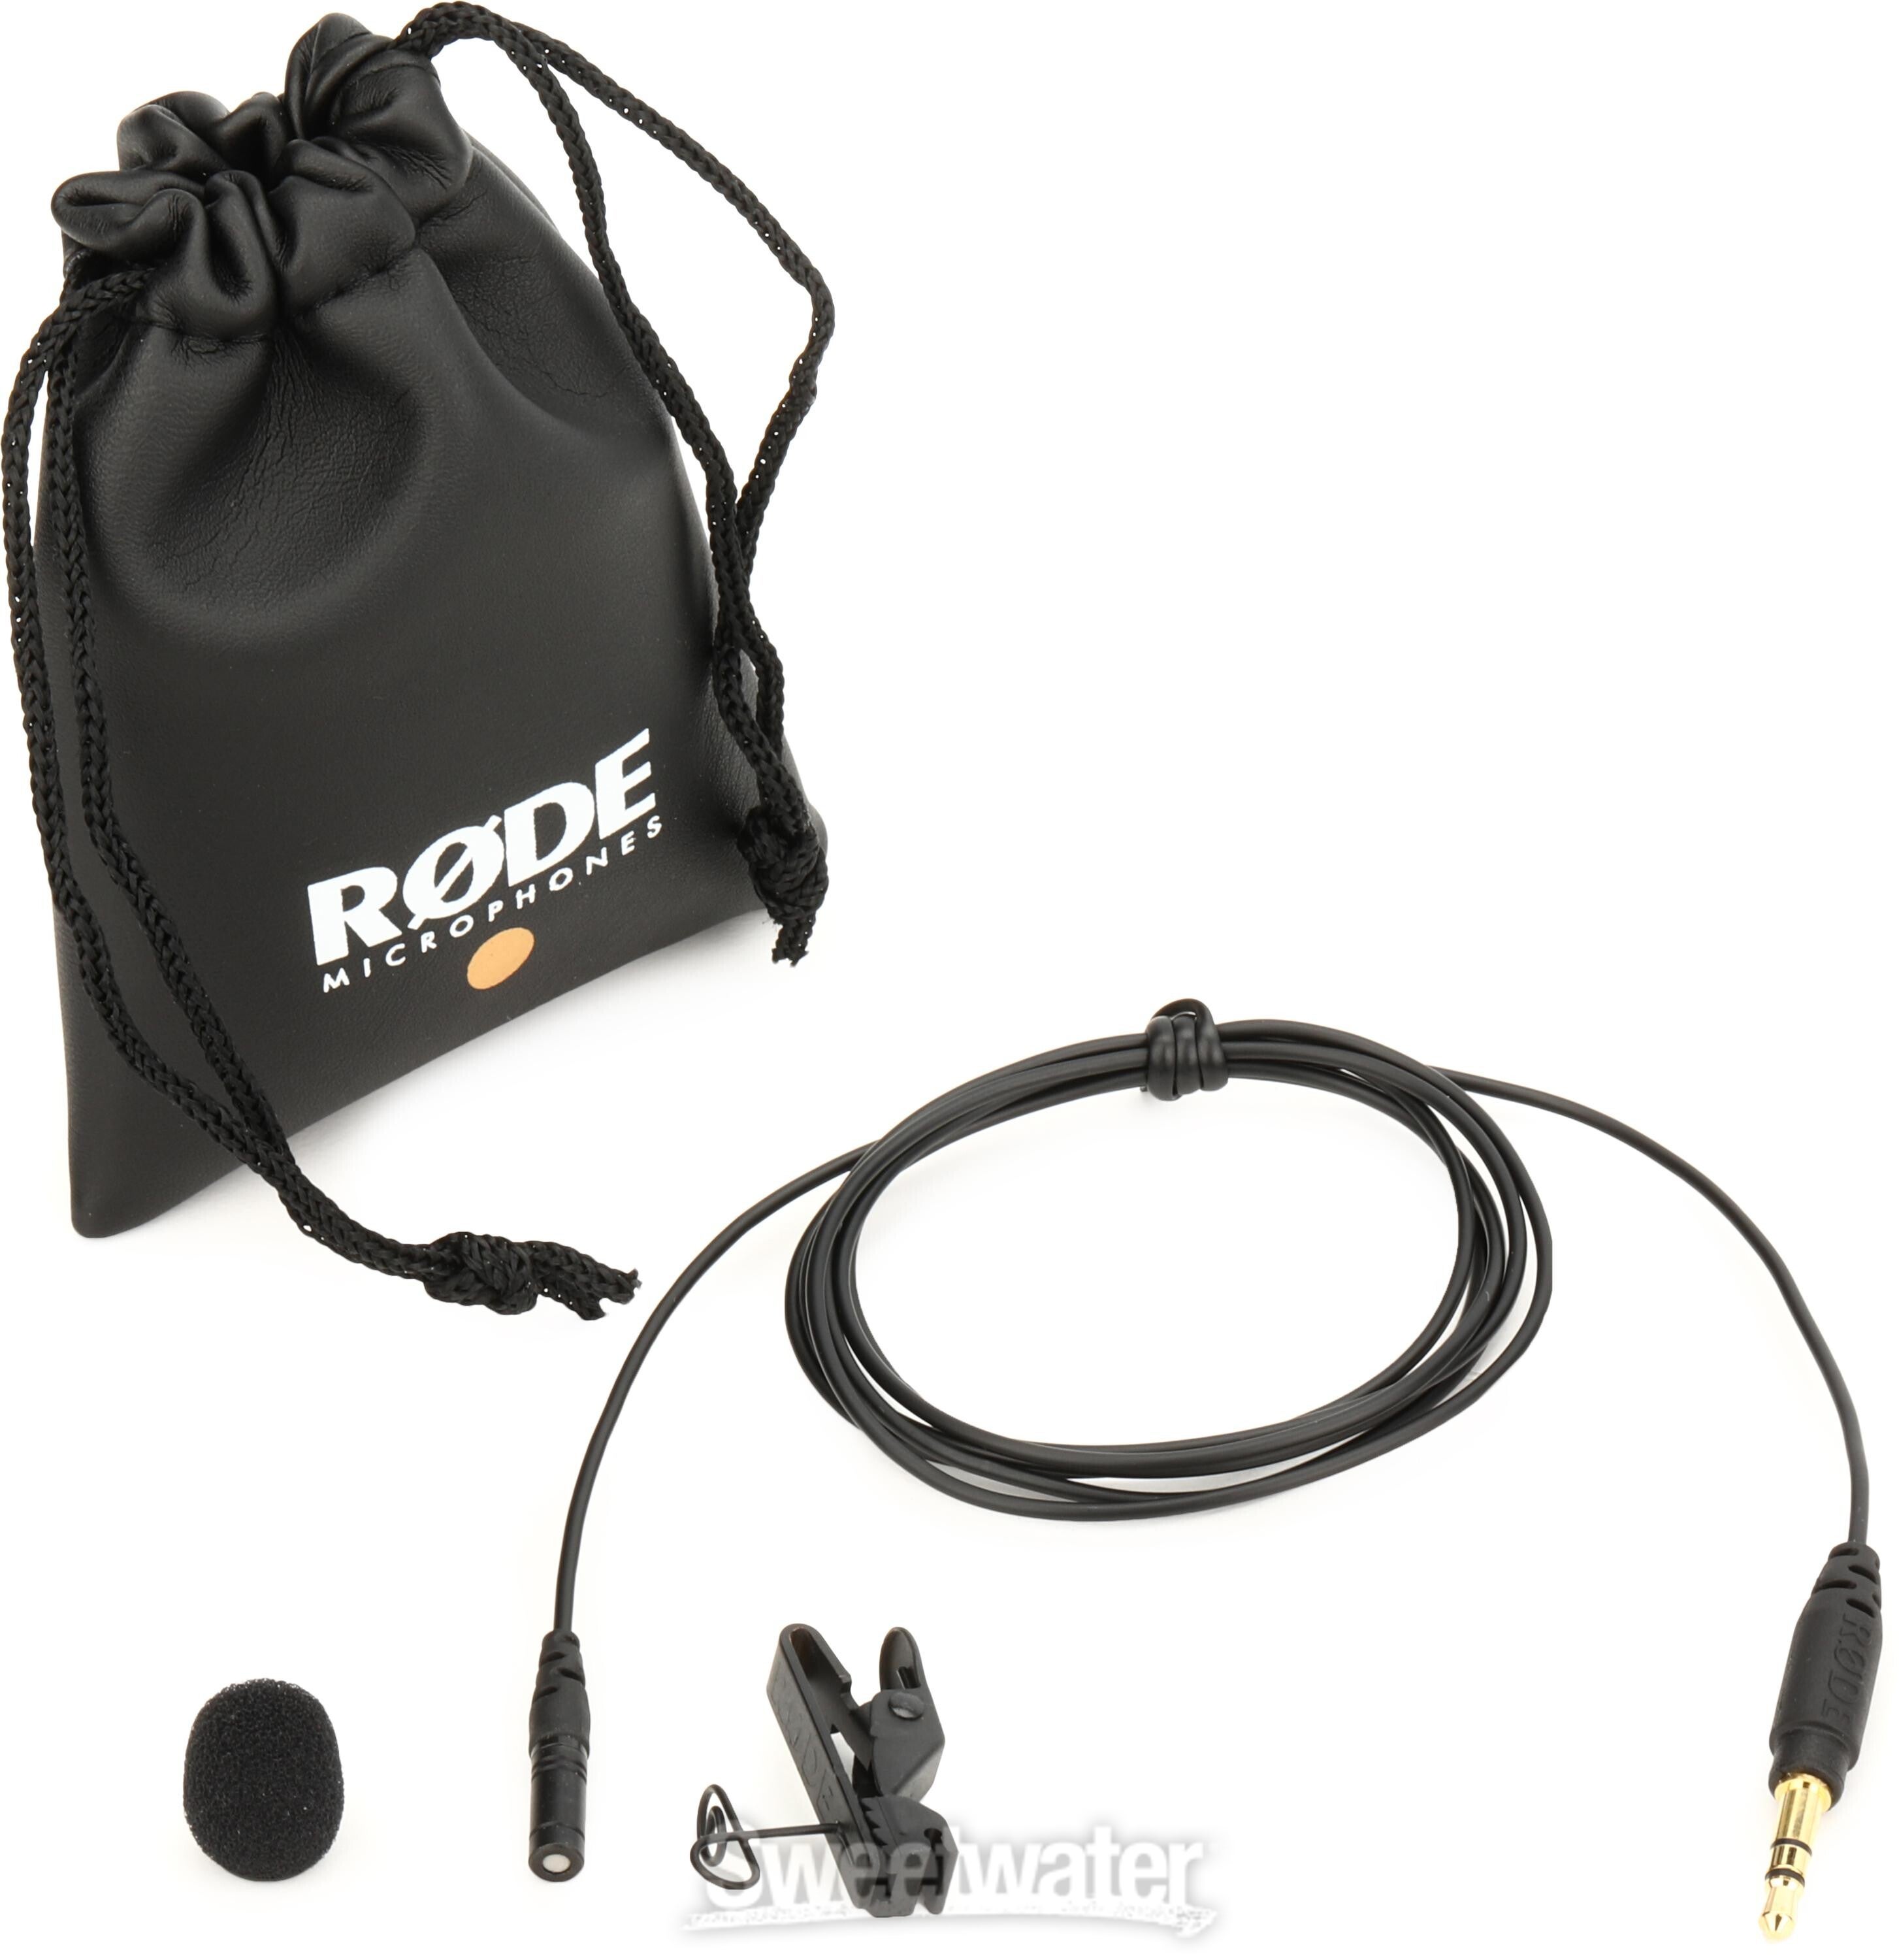 Rode Lavalier GO Professional Wearable Microphone Reviews | Sweetwater